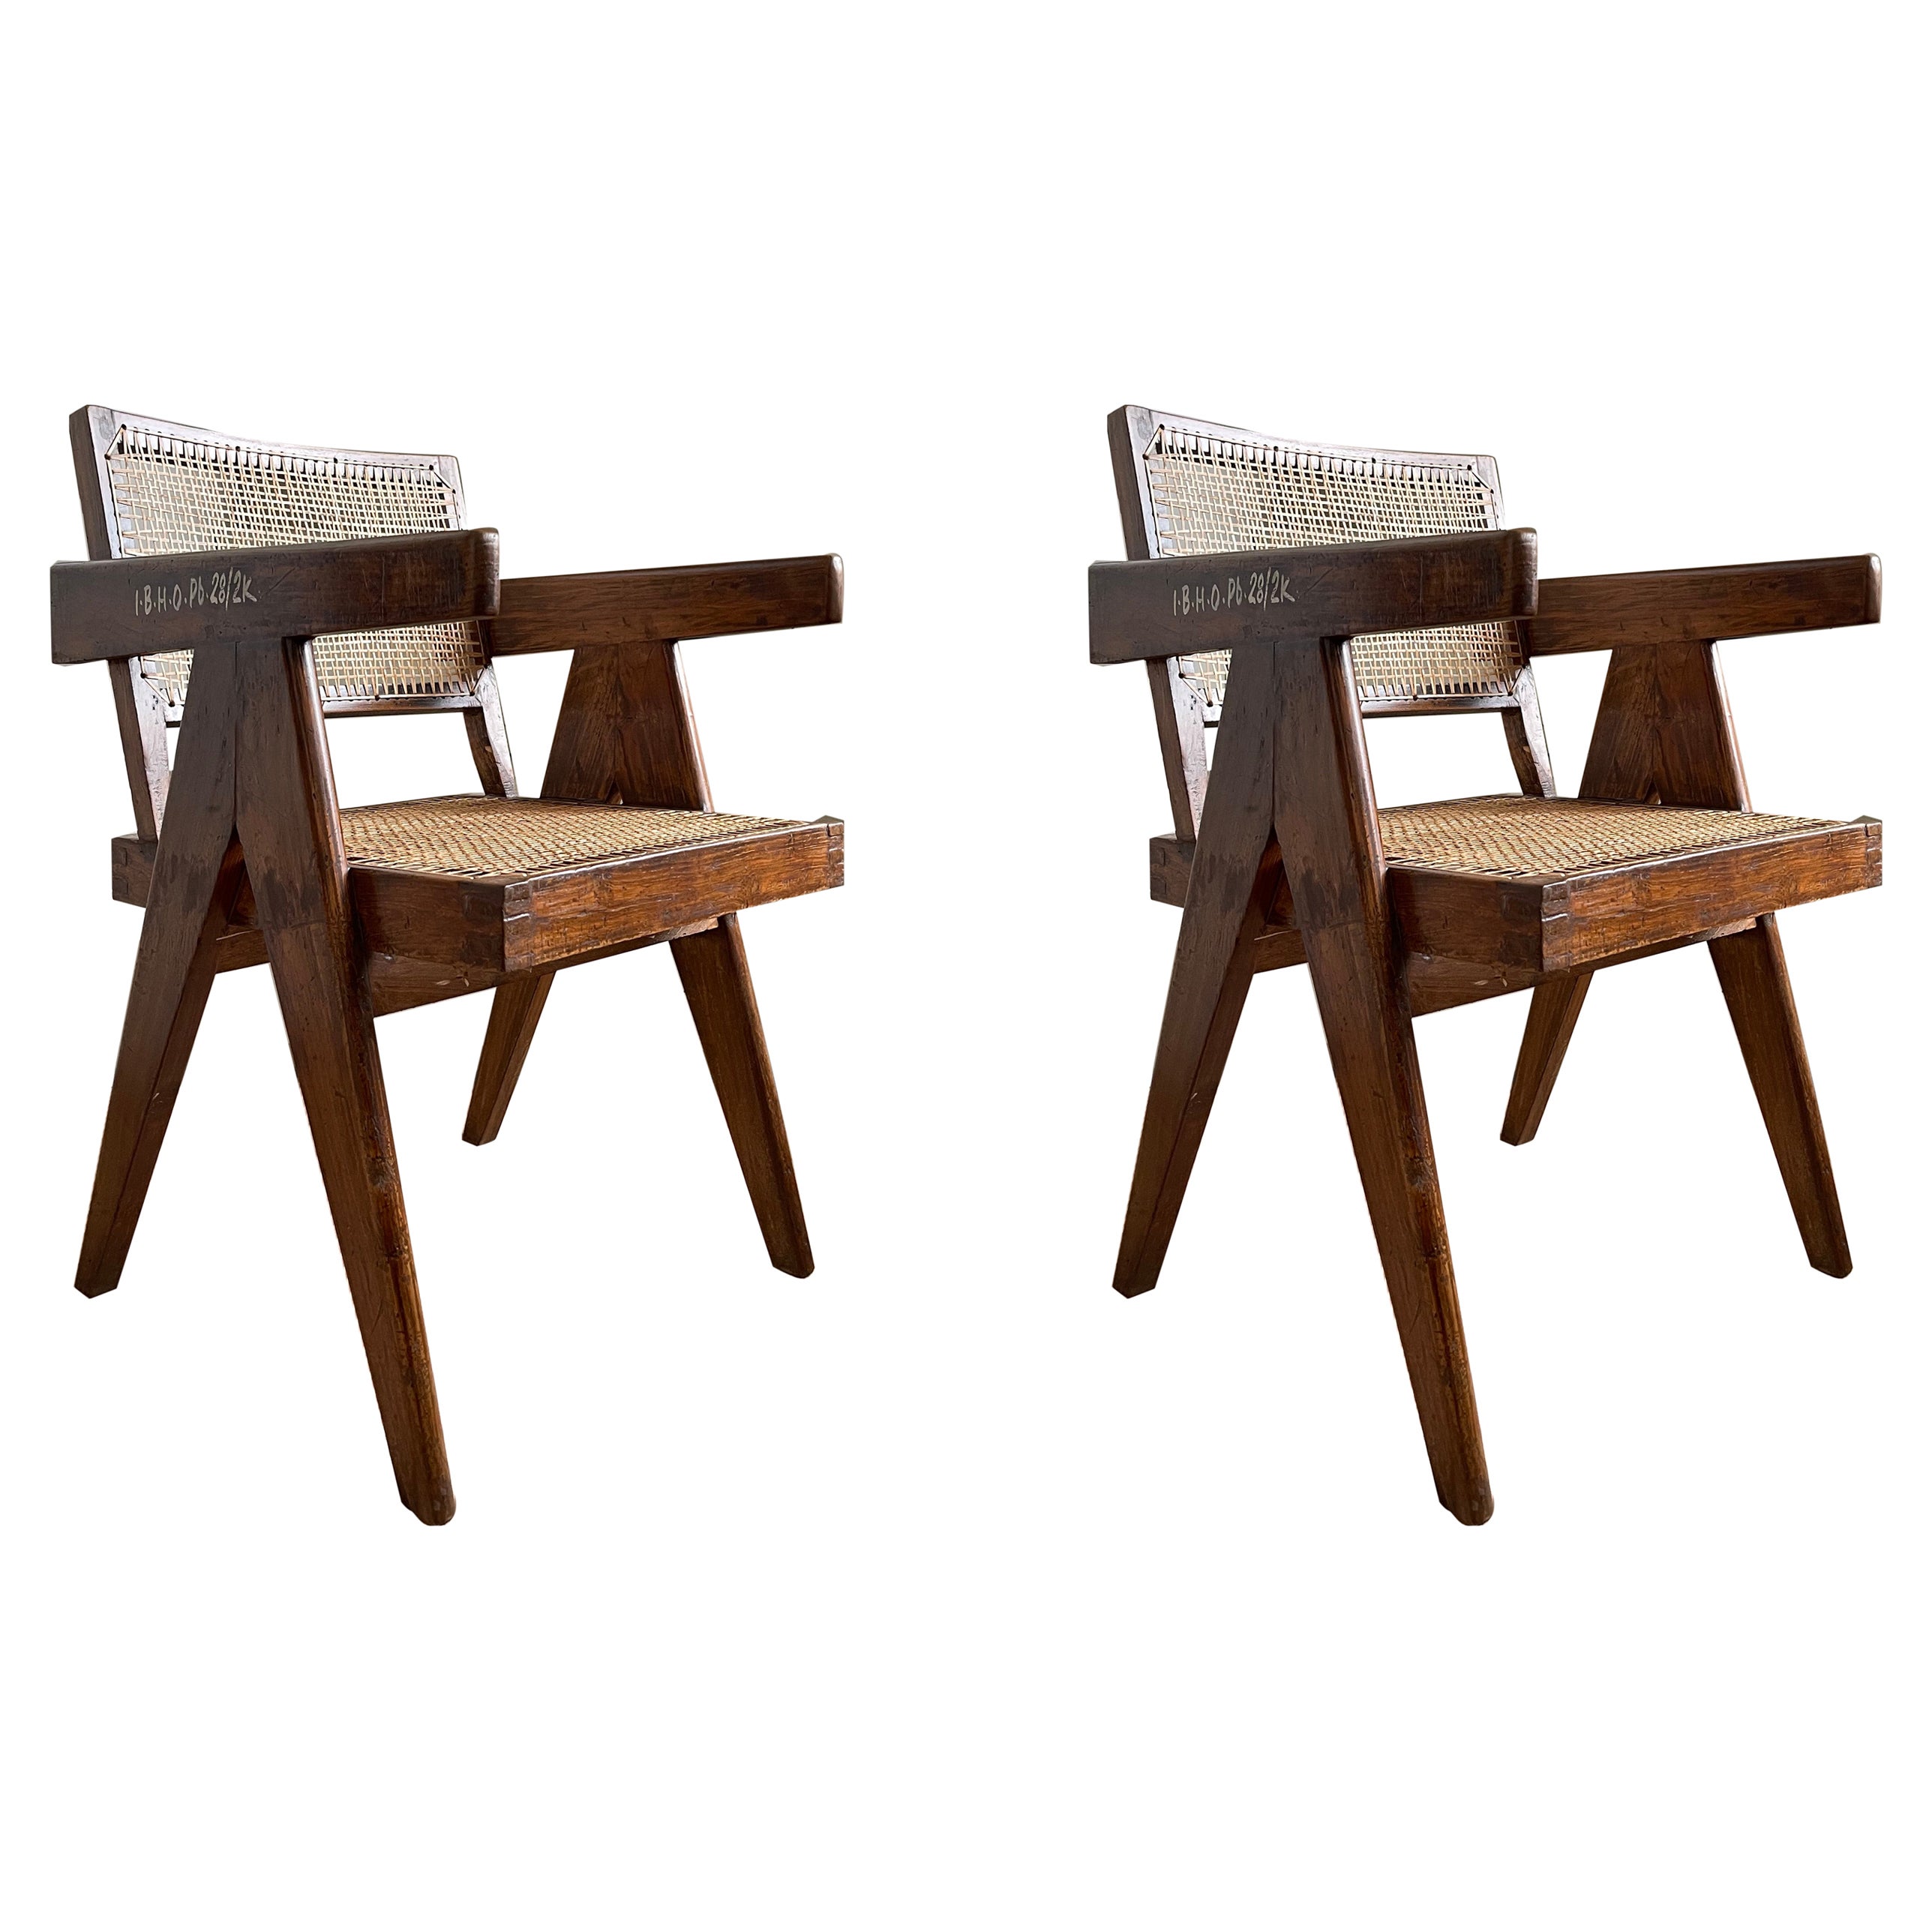 Pair of Pierre Jeanneret Office Chairs with Rare Stencil Marks